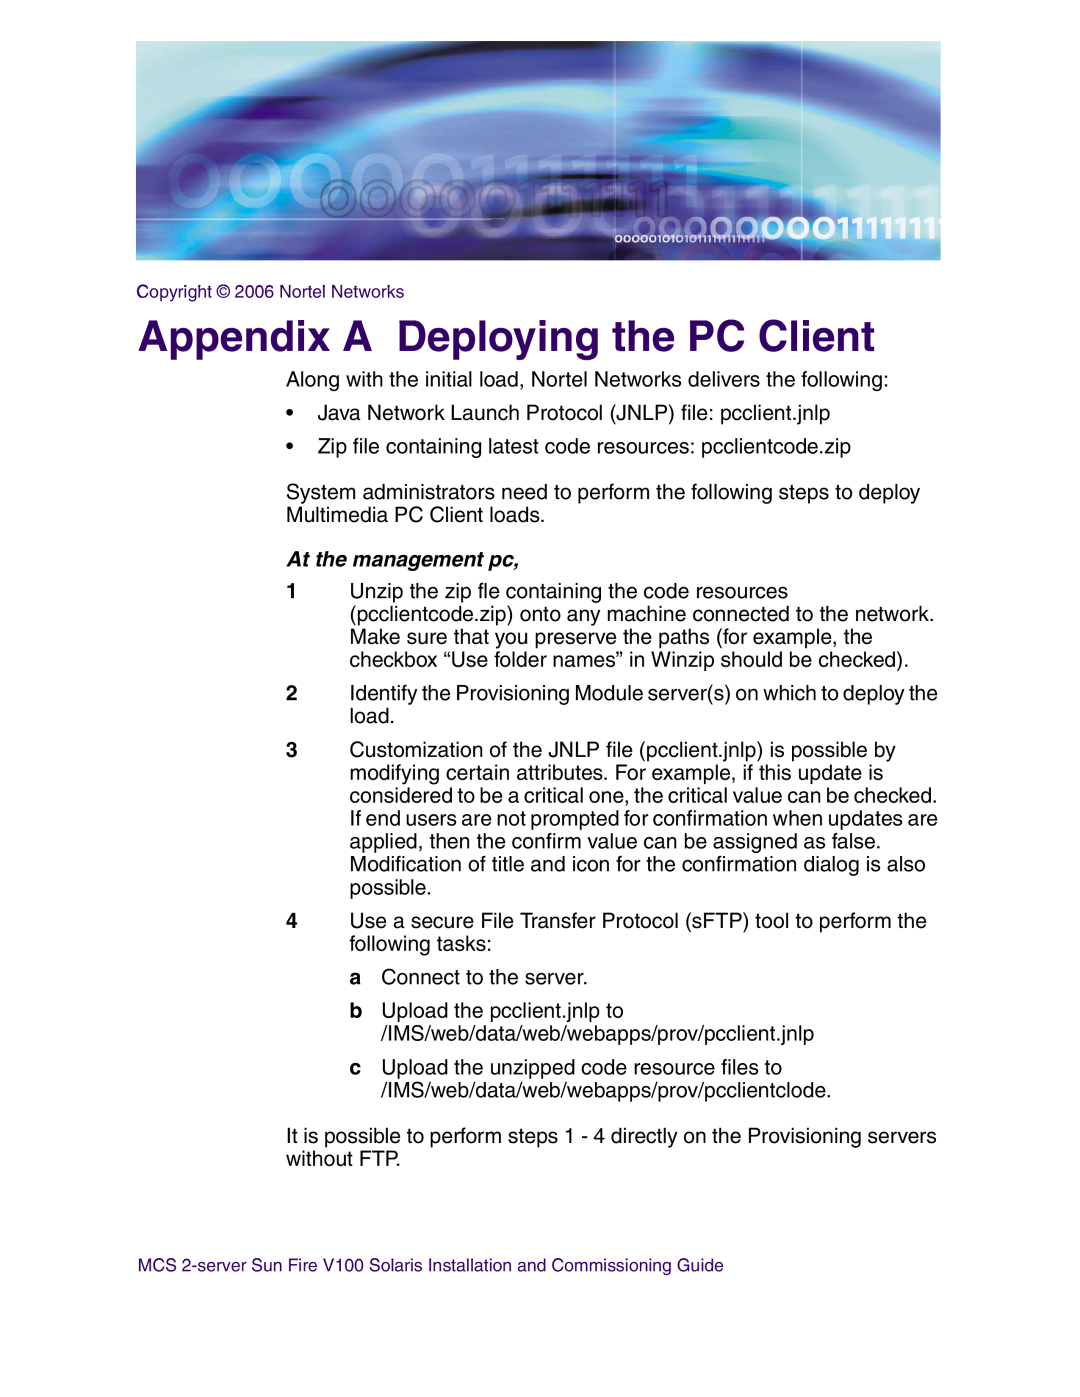 Nortel Networks V100 manual Appendix A Deploying the PC Client, At the management pc 